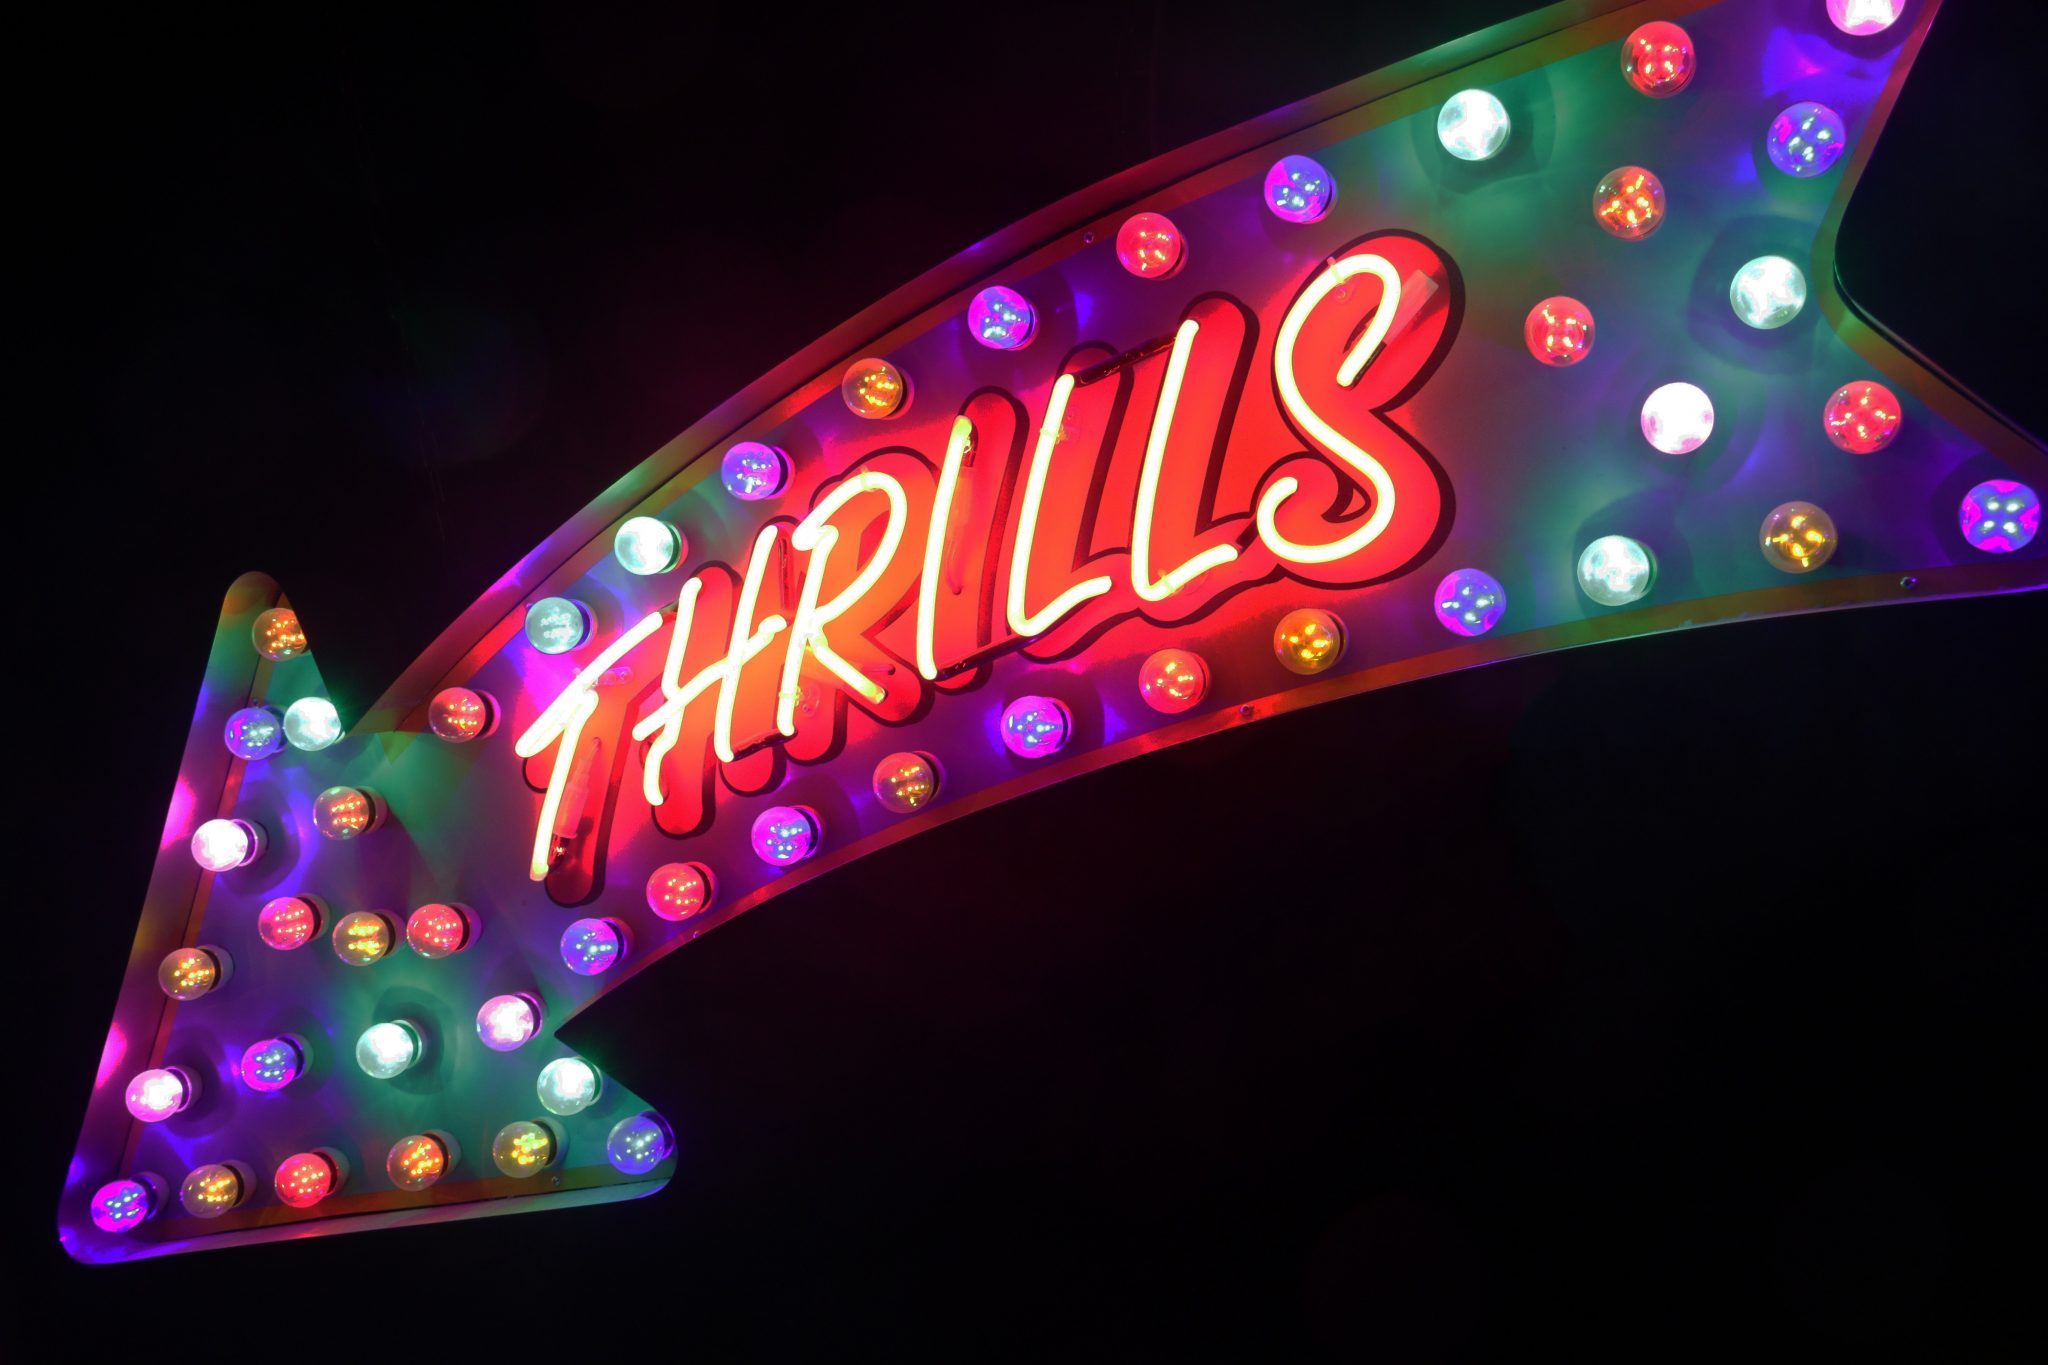 An arrow-shaped neon sign that says "thrills"